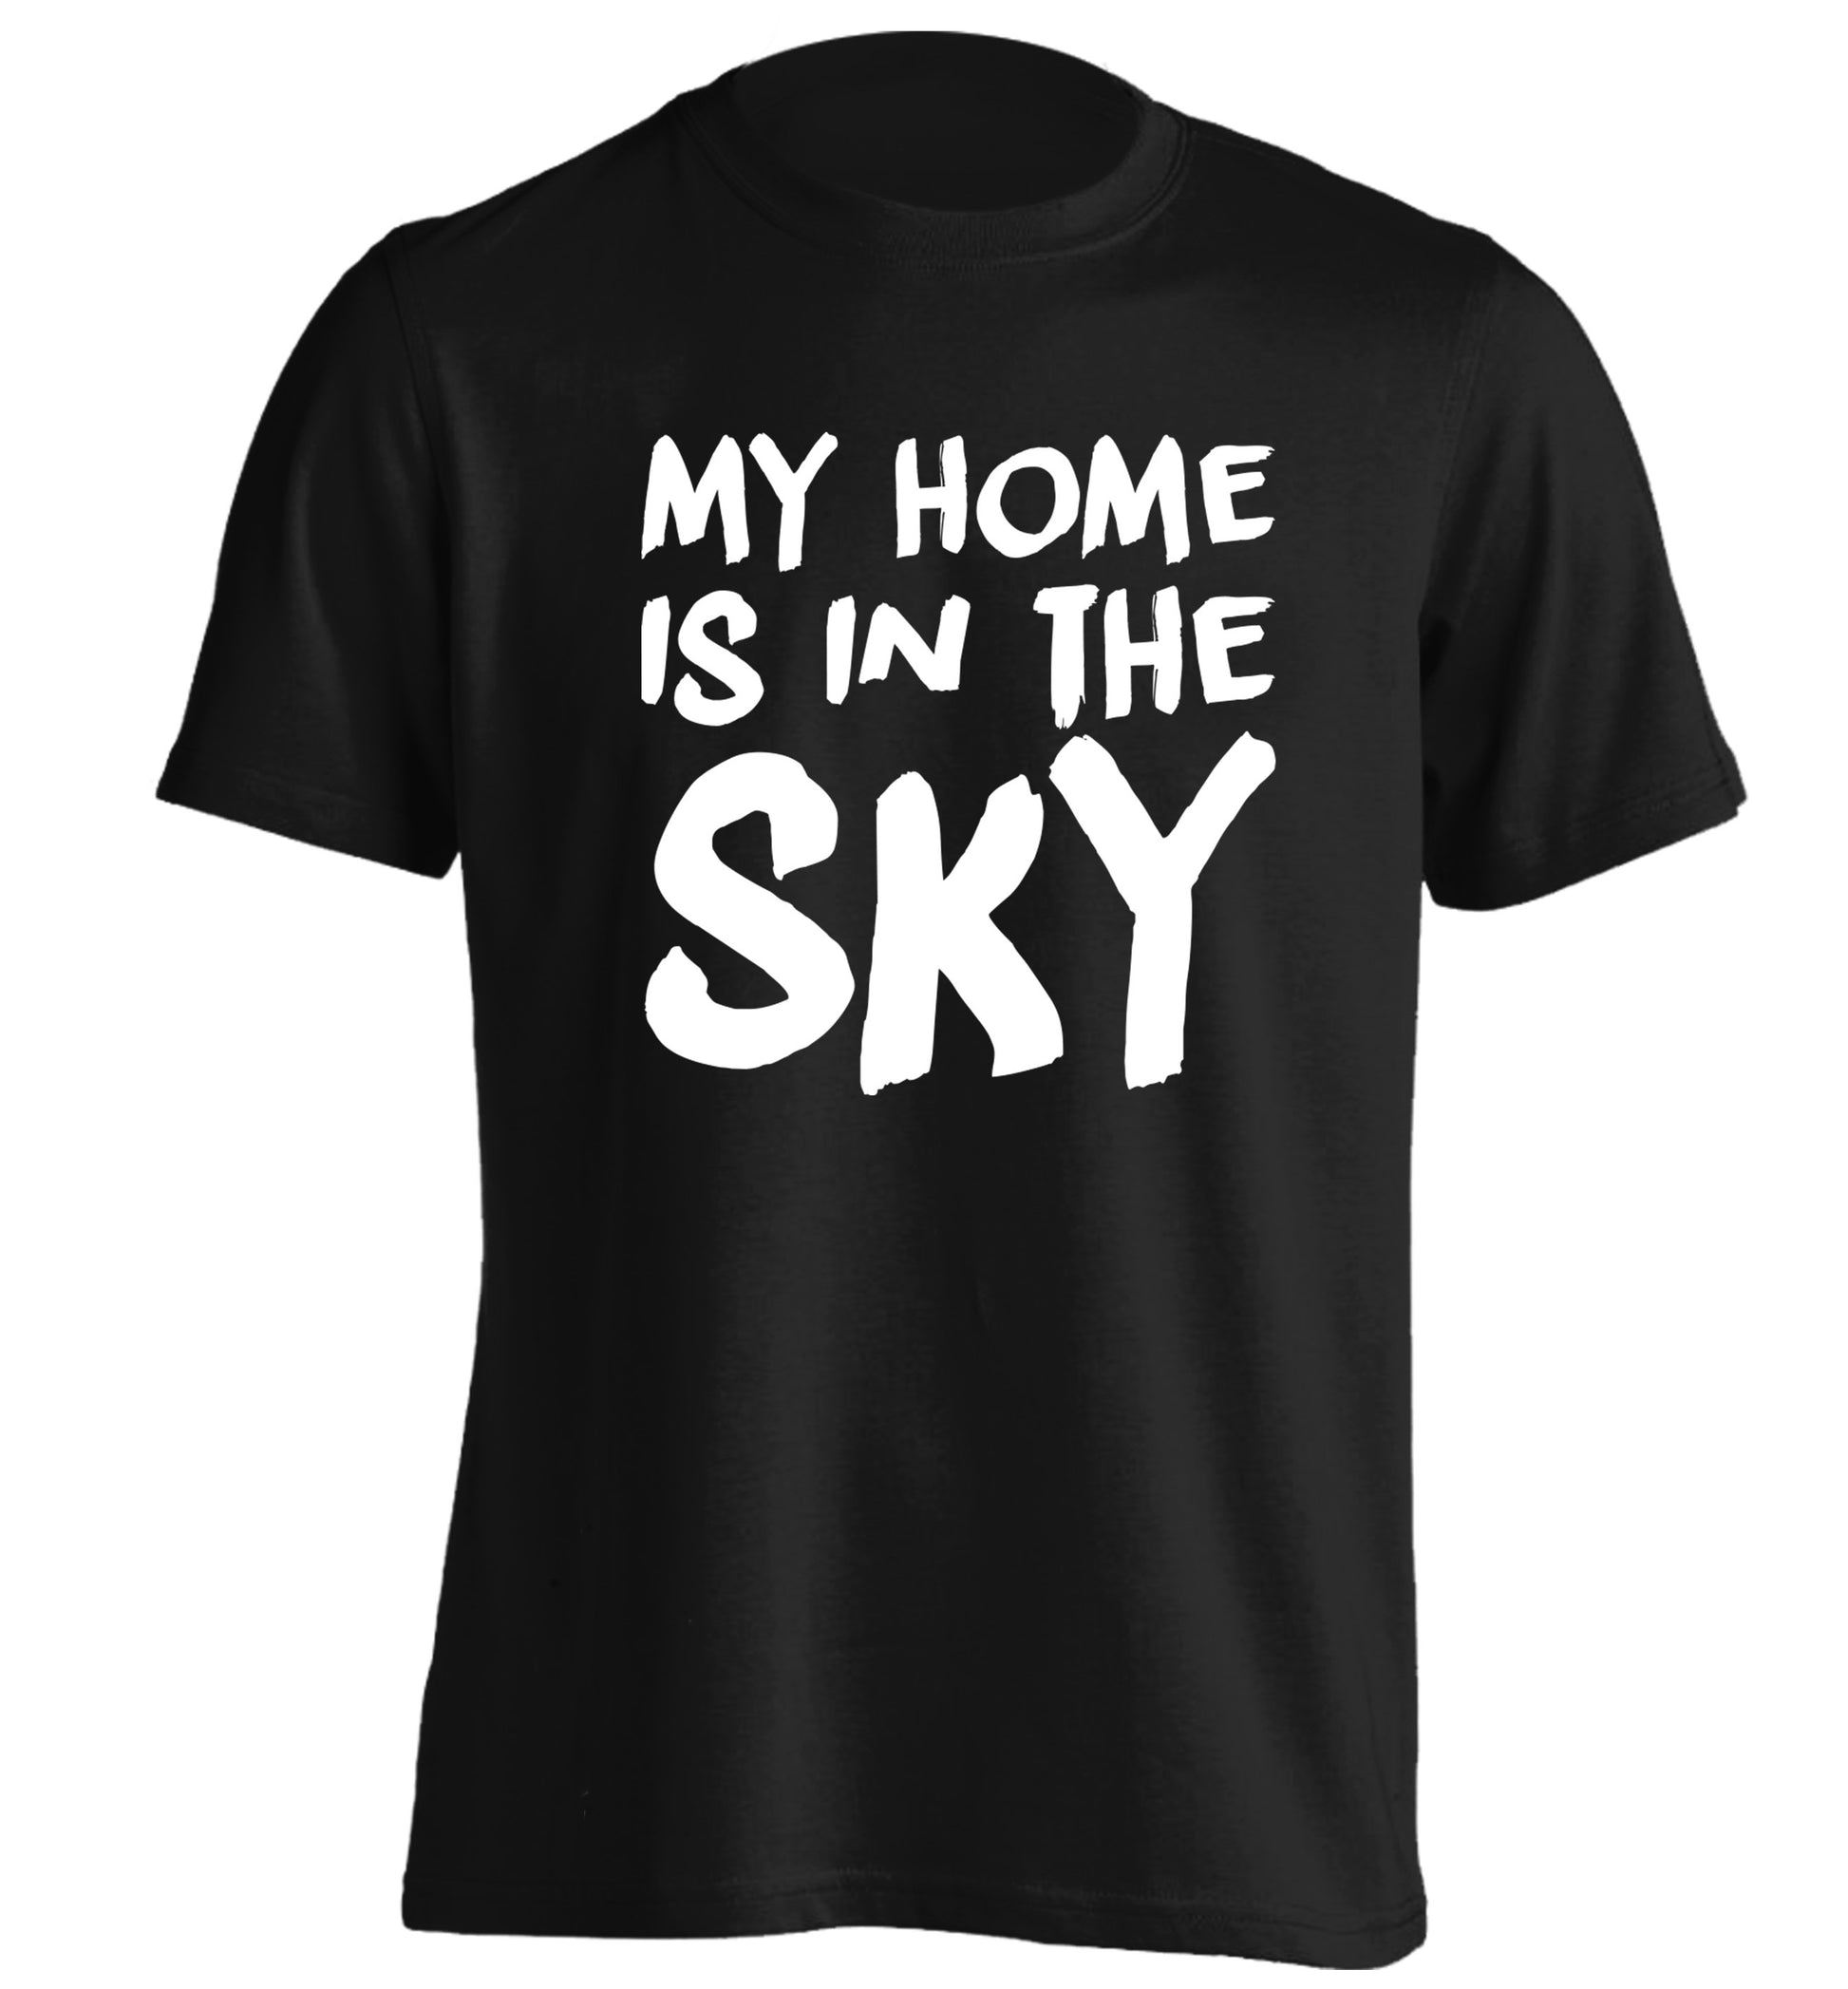 My home is in the sky adults unisex black Tshirt 2XL